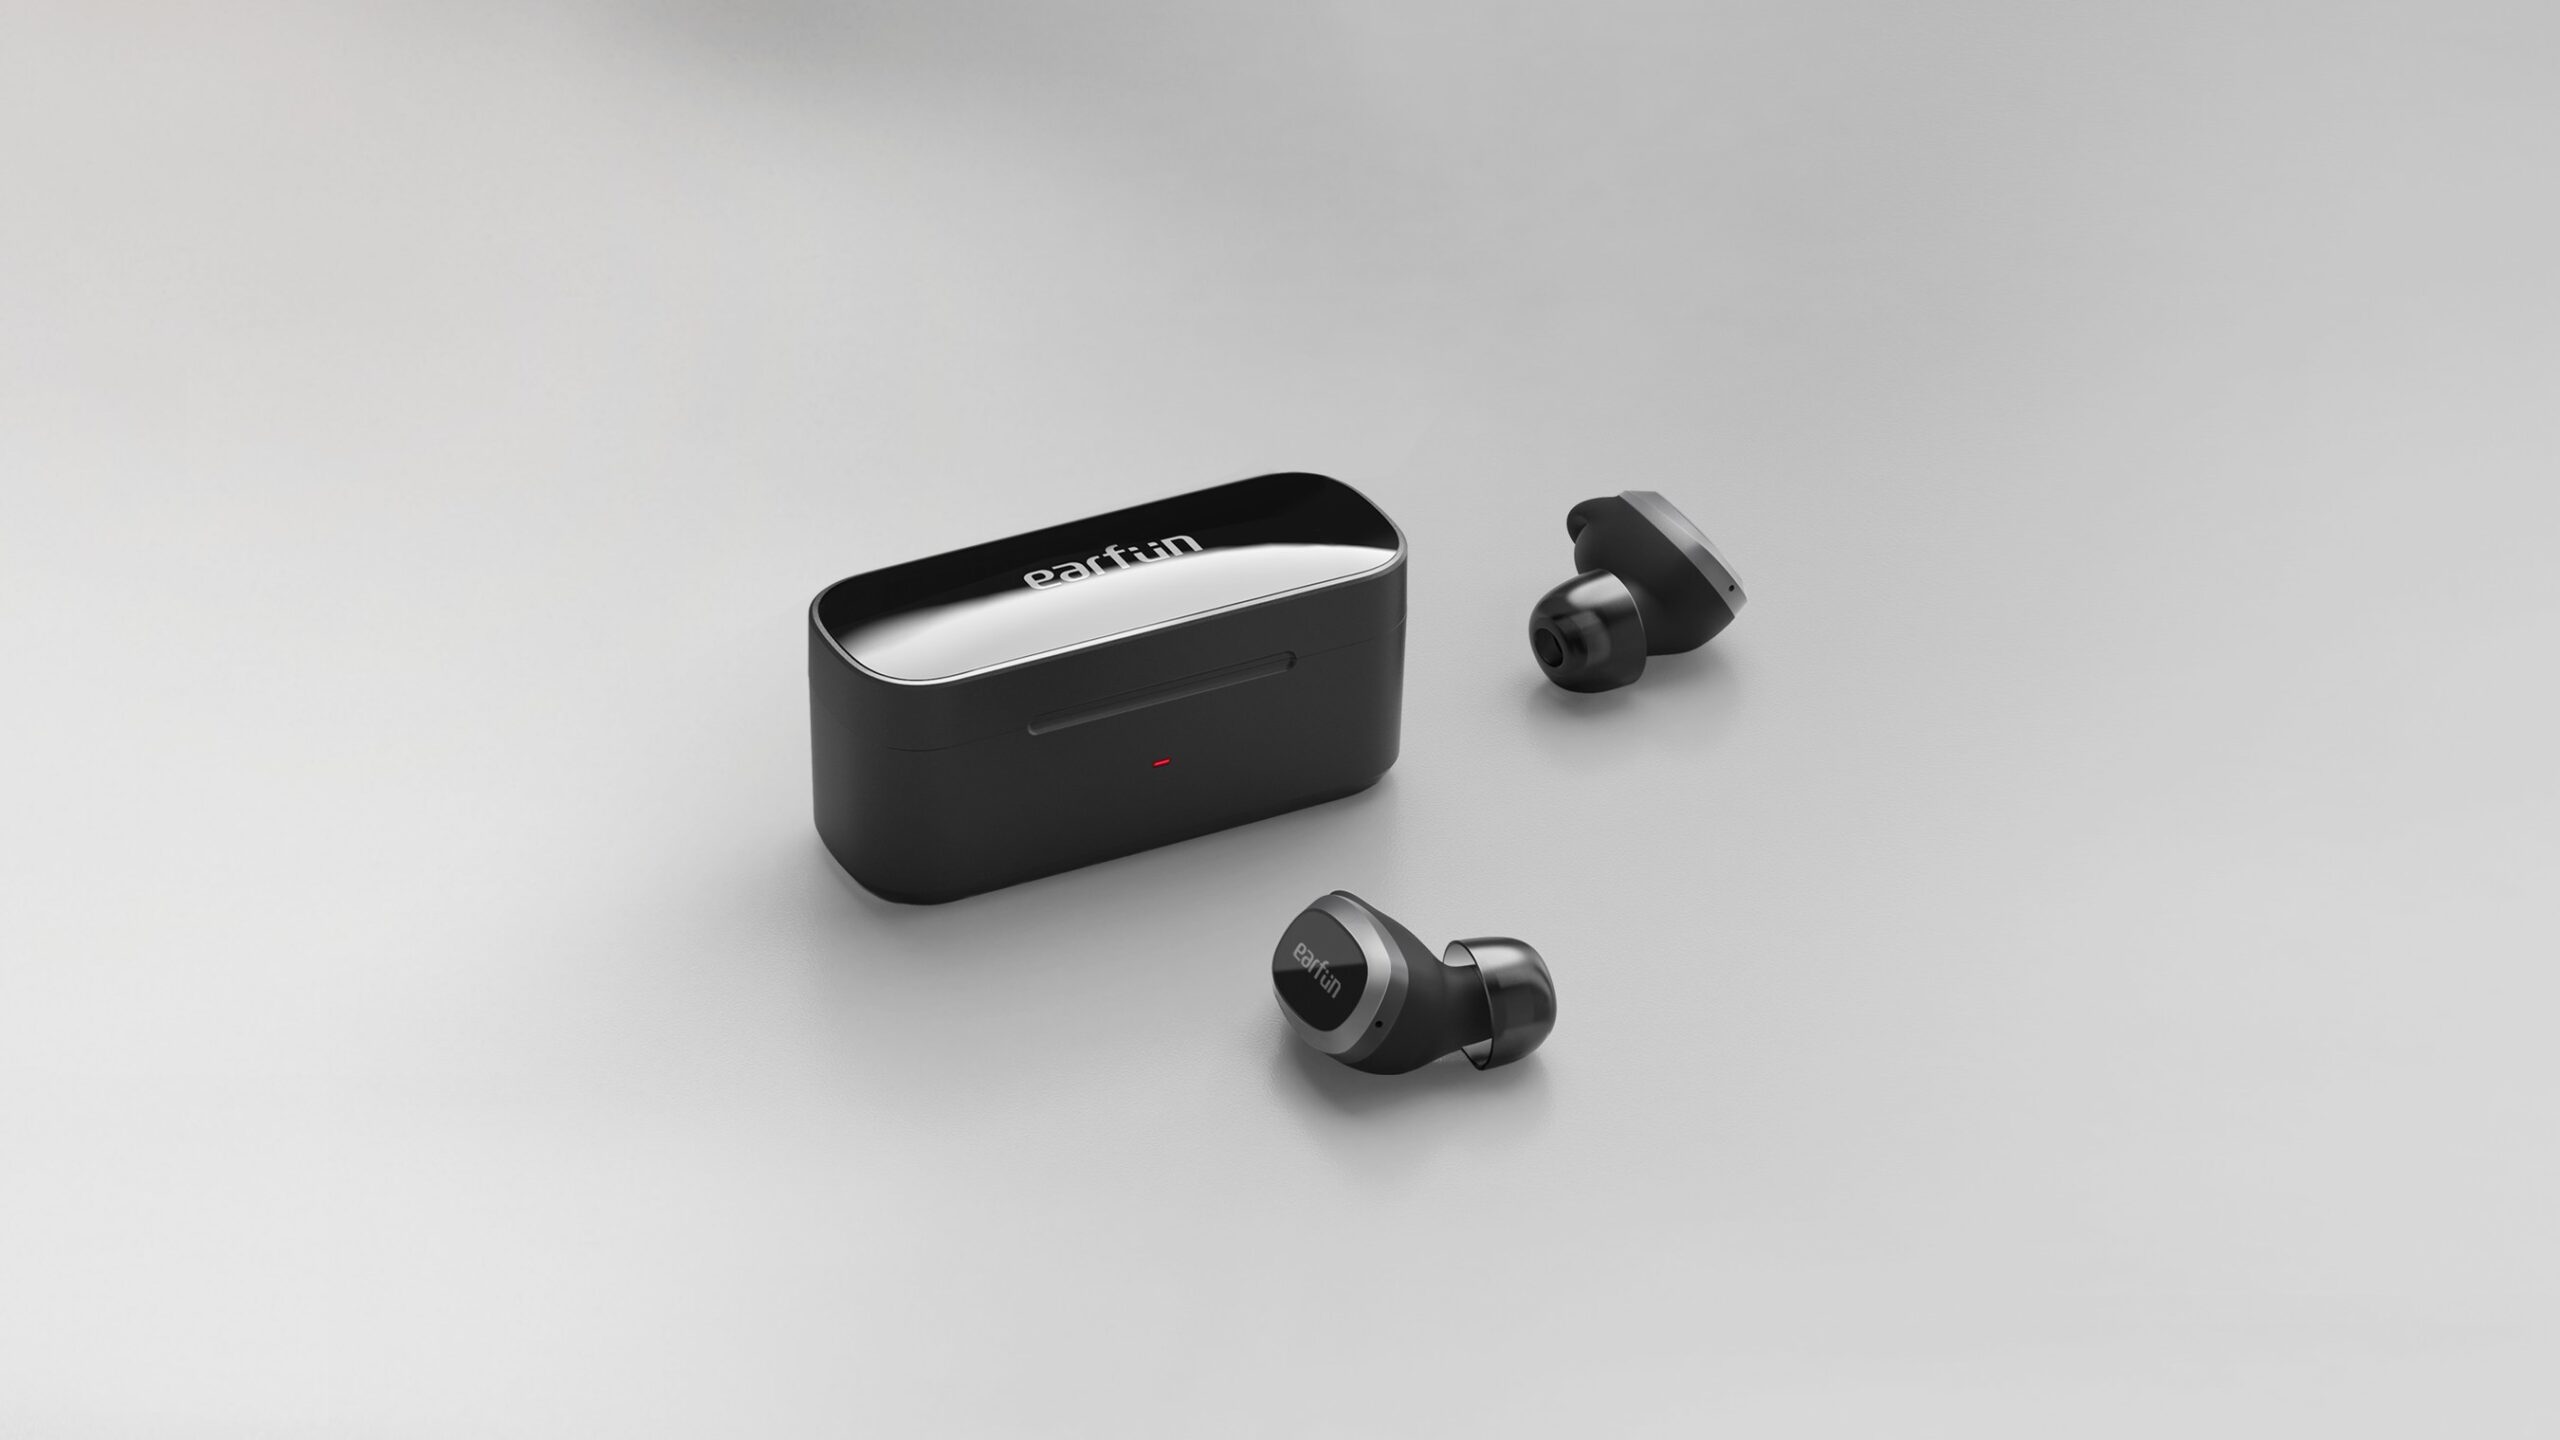 EarFun Sets Record for Lightest ANC Wireless Earbuds at Just 4.1 Grams with New EarFun Free Pro